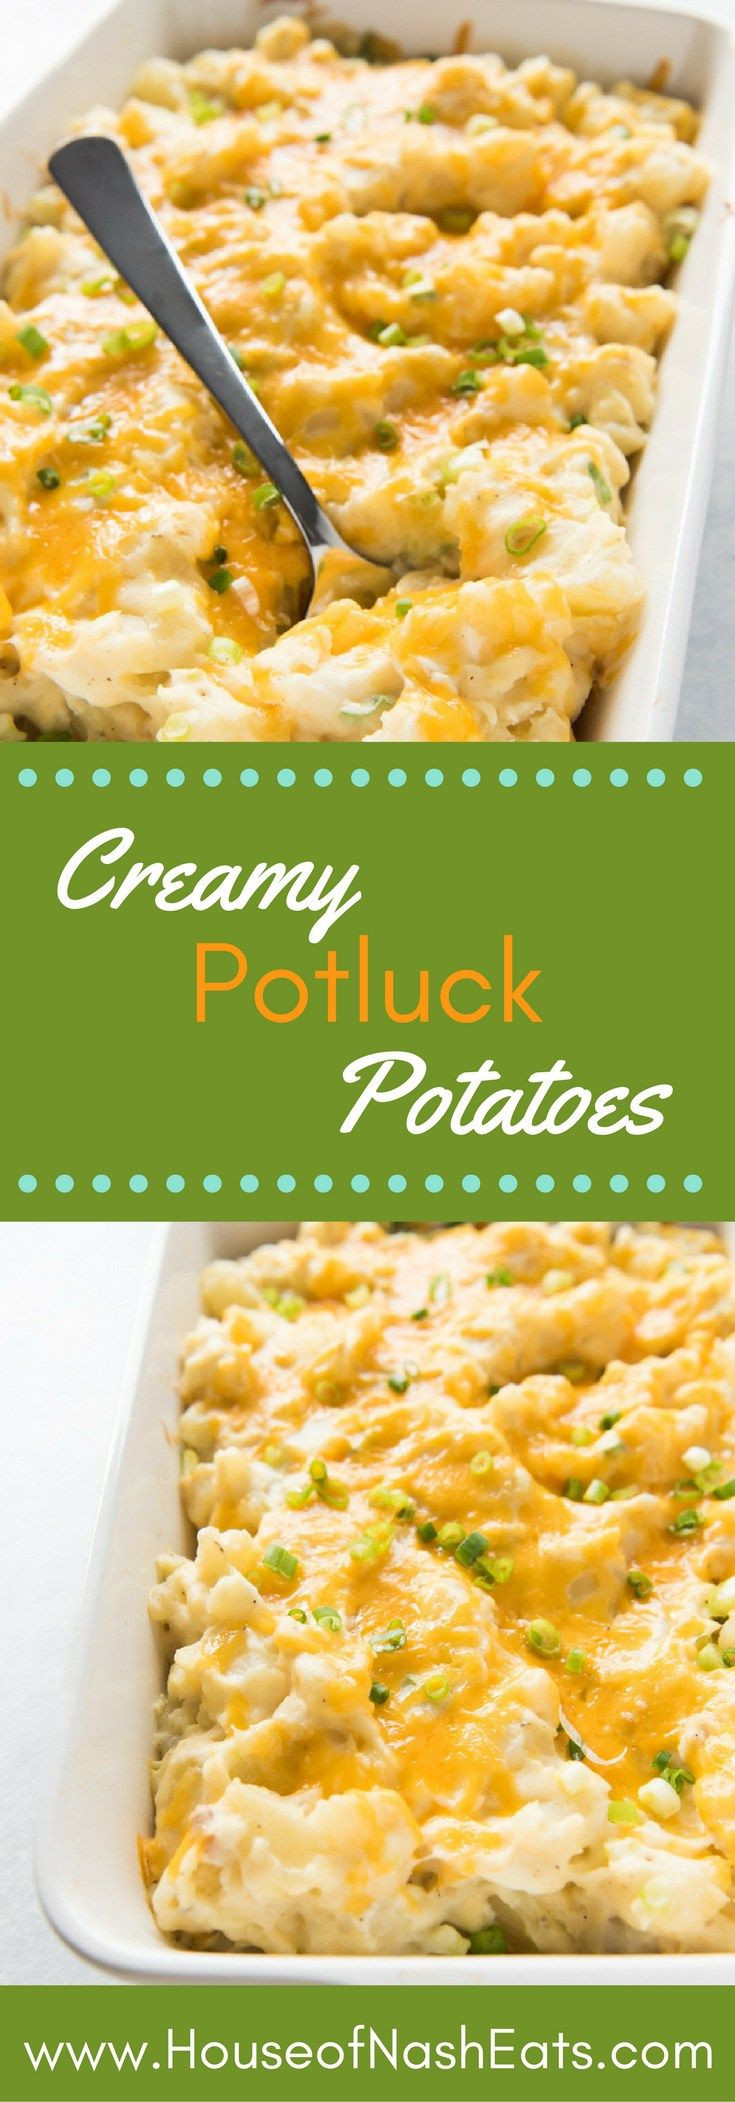 Christmas Side Dishes For A Crowd
 Best 20 Church potluck recipes ideas on Pinterest